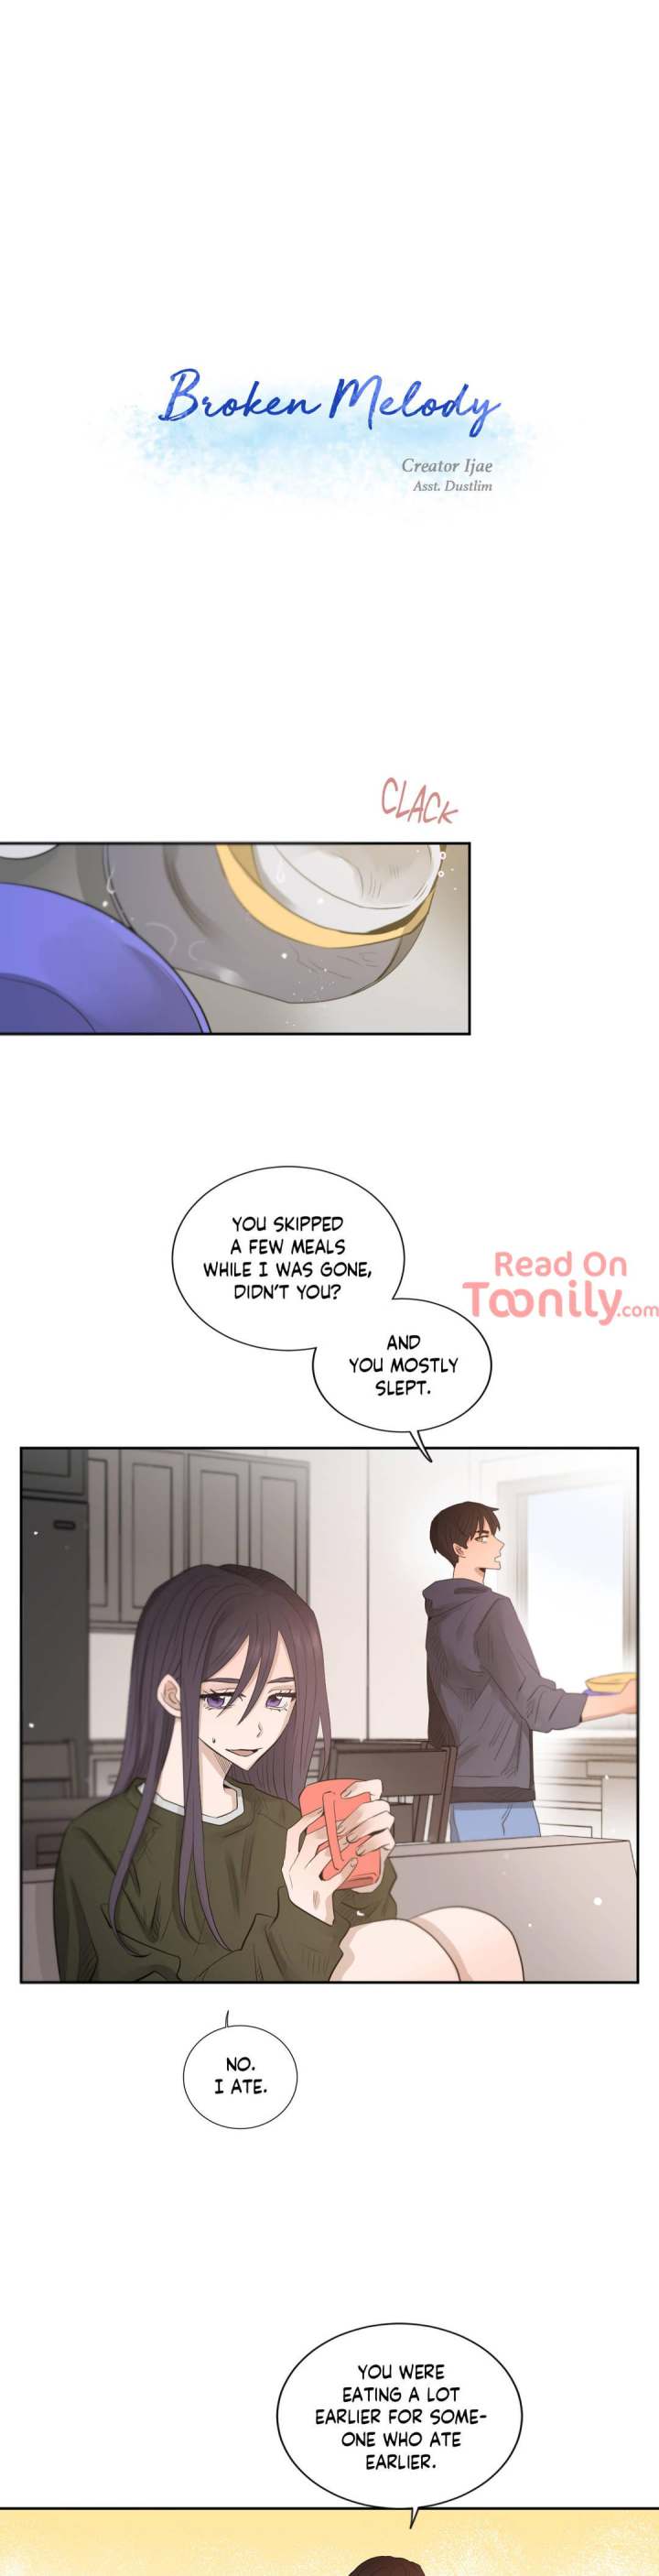 Broken Melody - Chapter 31 Page 1